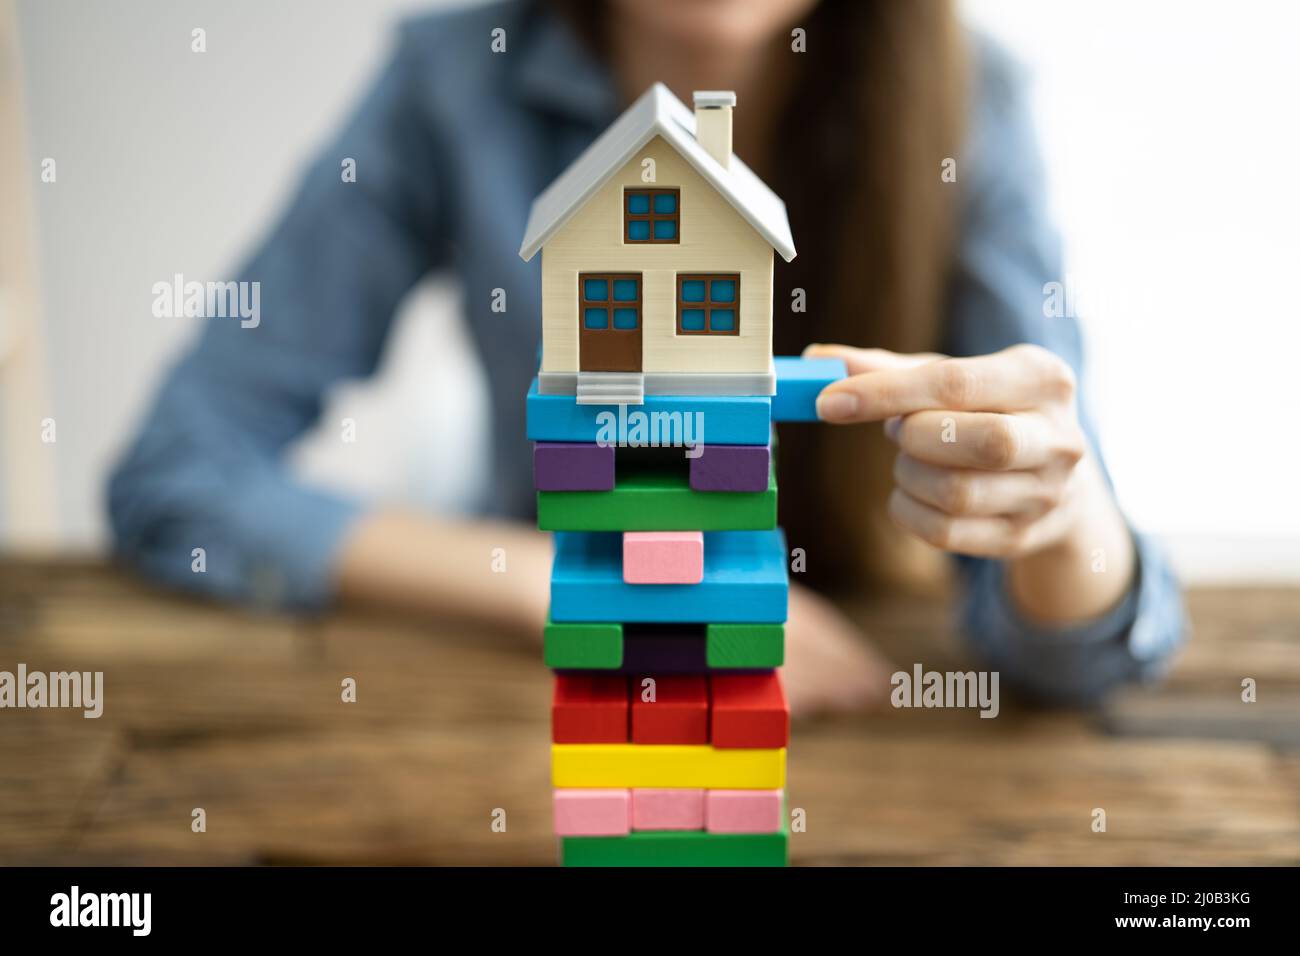 House Mortgage Property Risk And Insurance Management Stock Photo